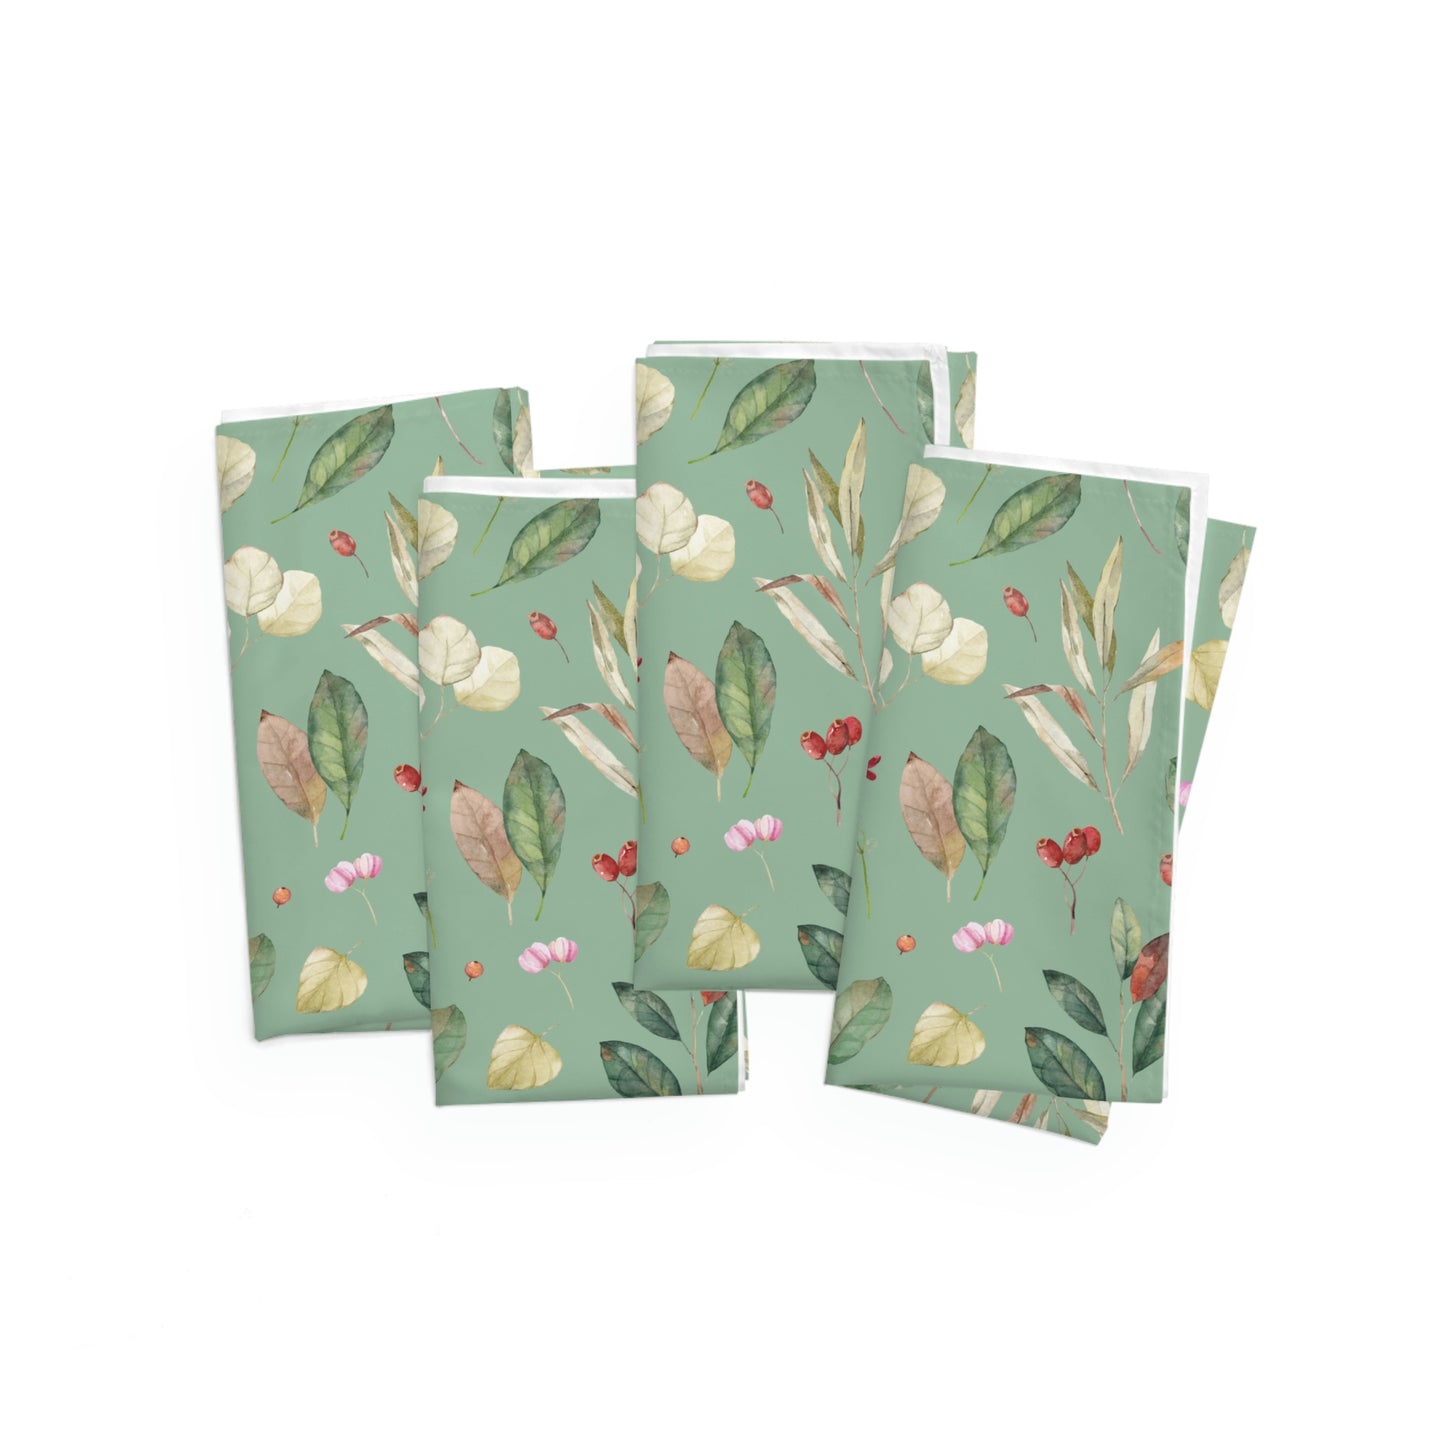 Leaves and Berries Cloth Napkins Set of 4 | Gifts For Home | Gifts For Her